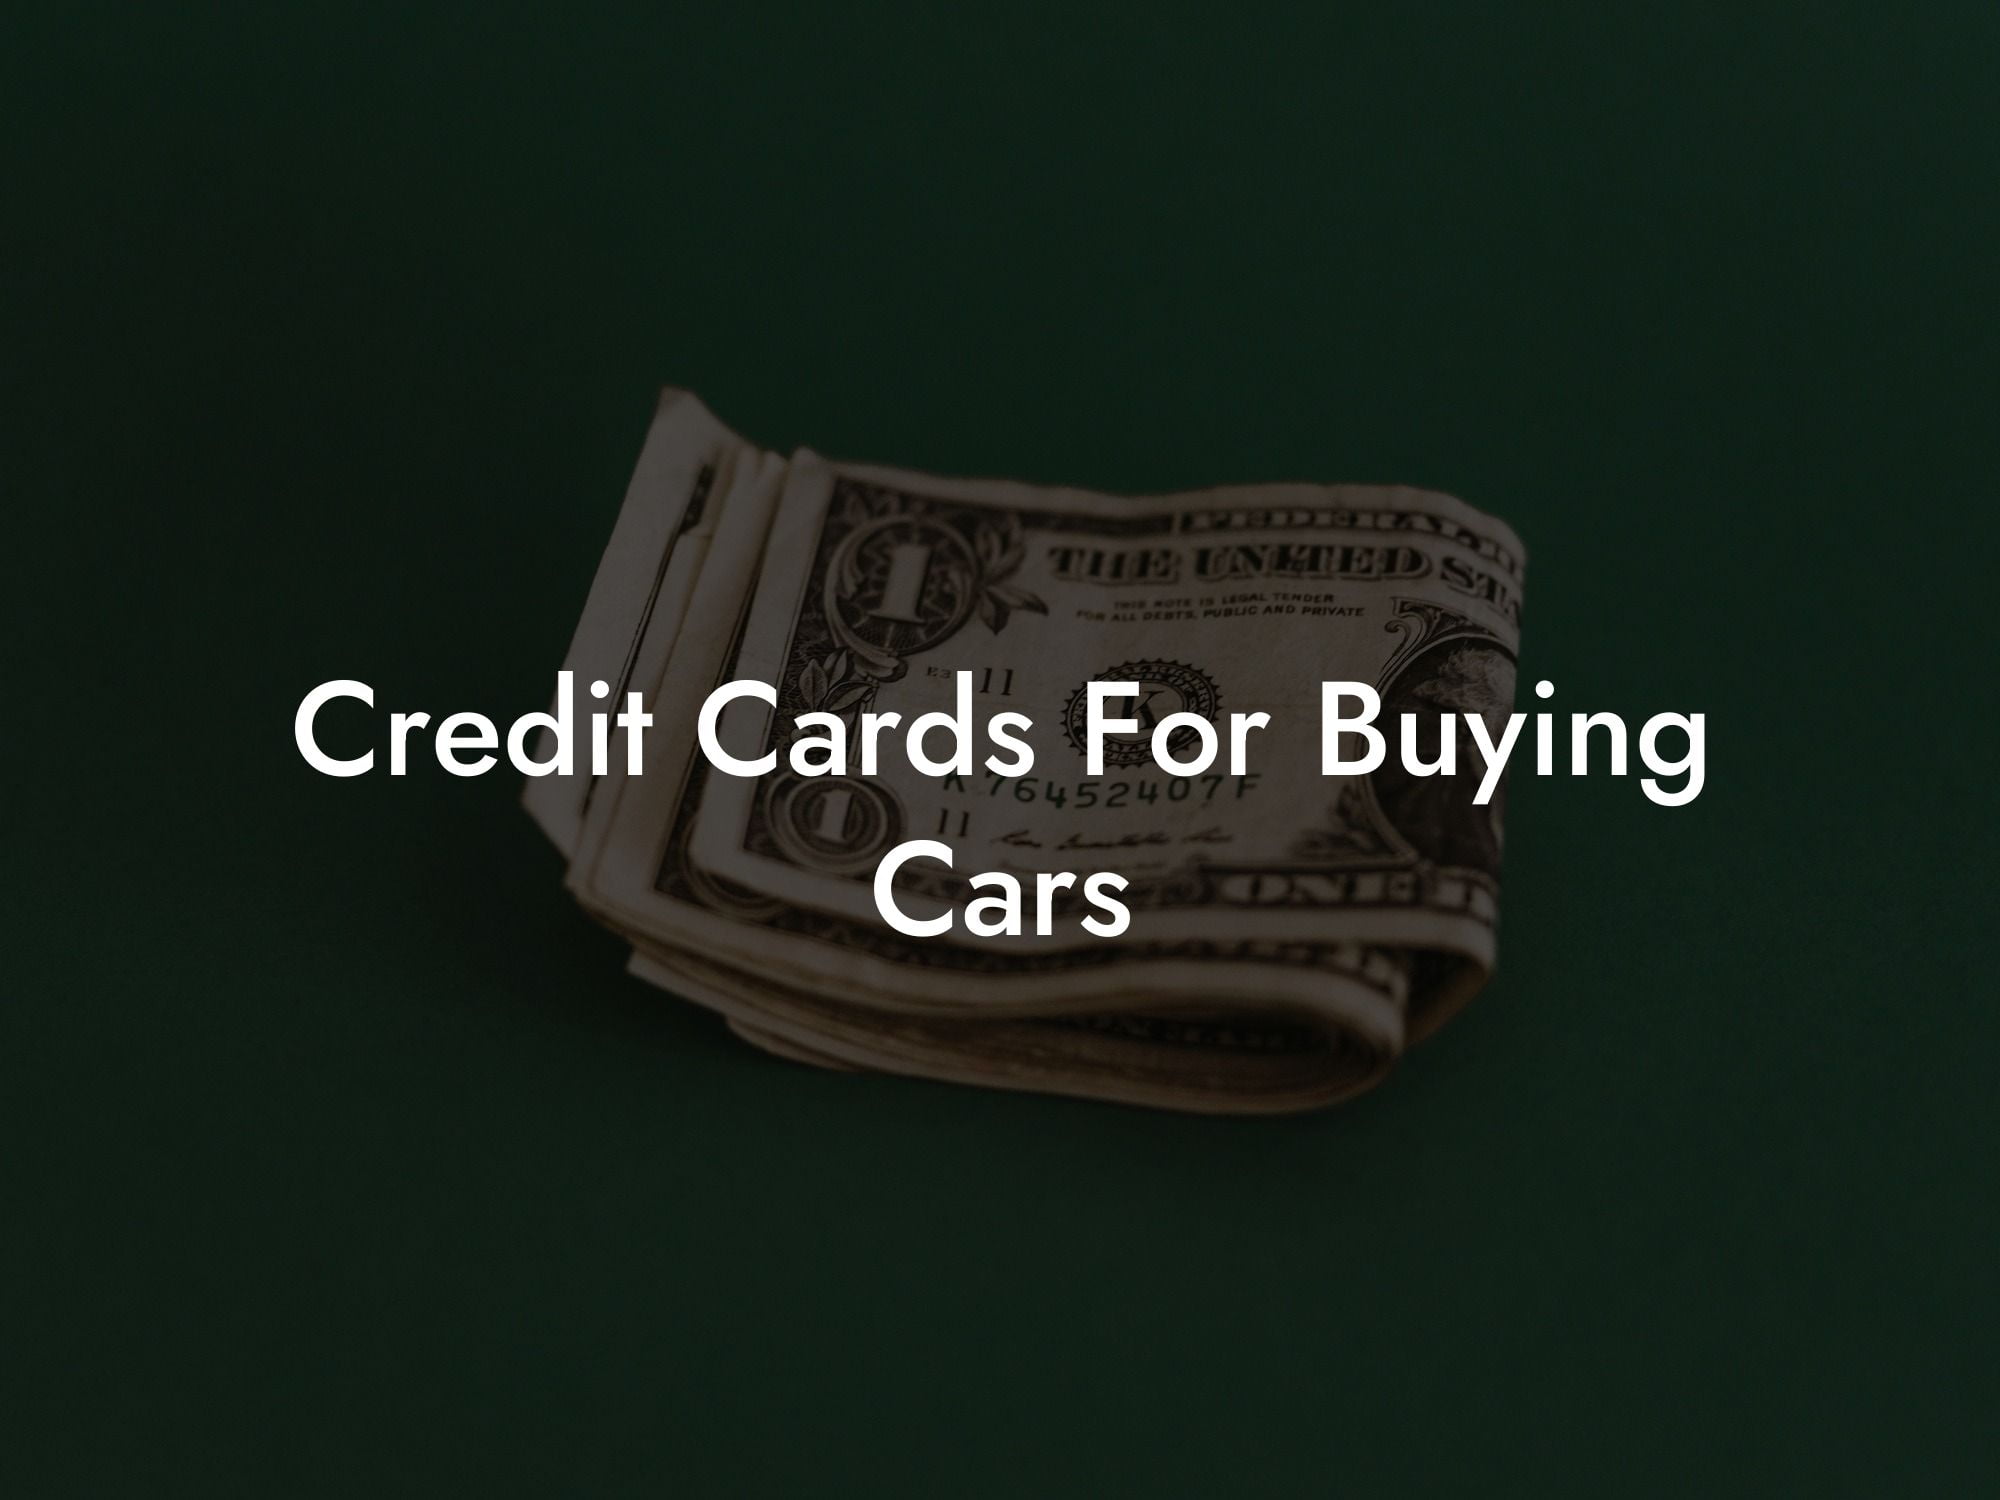 Credit Cards For Buying Cars